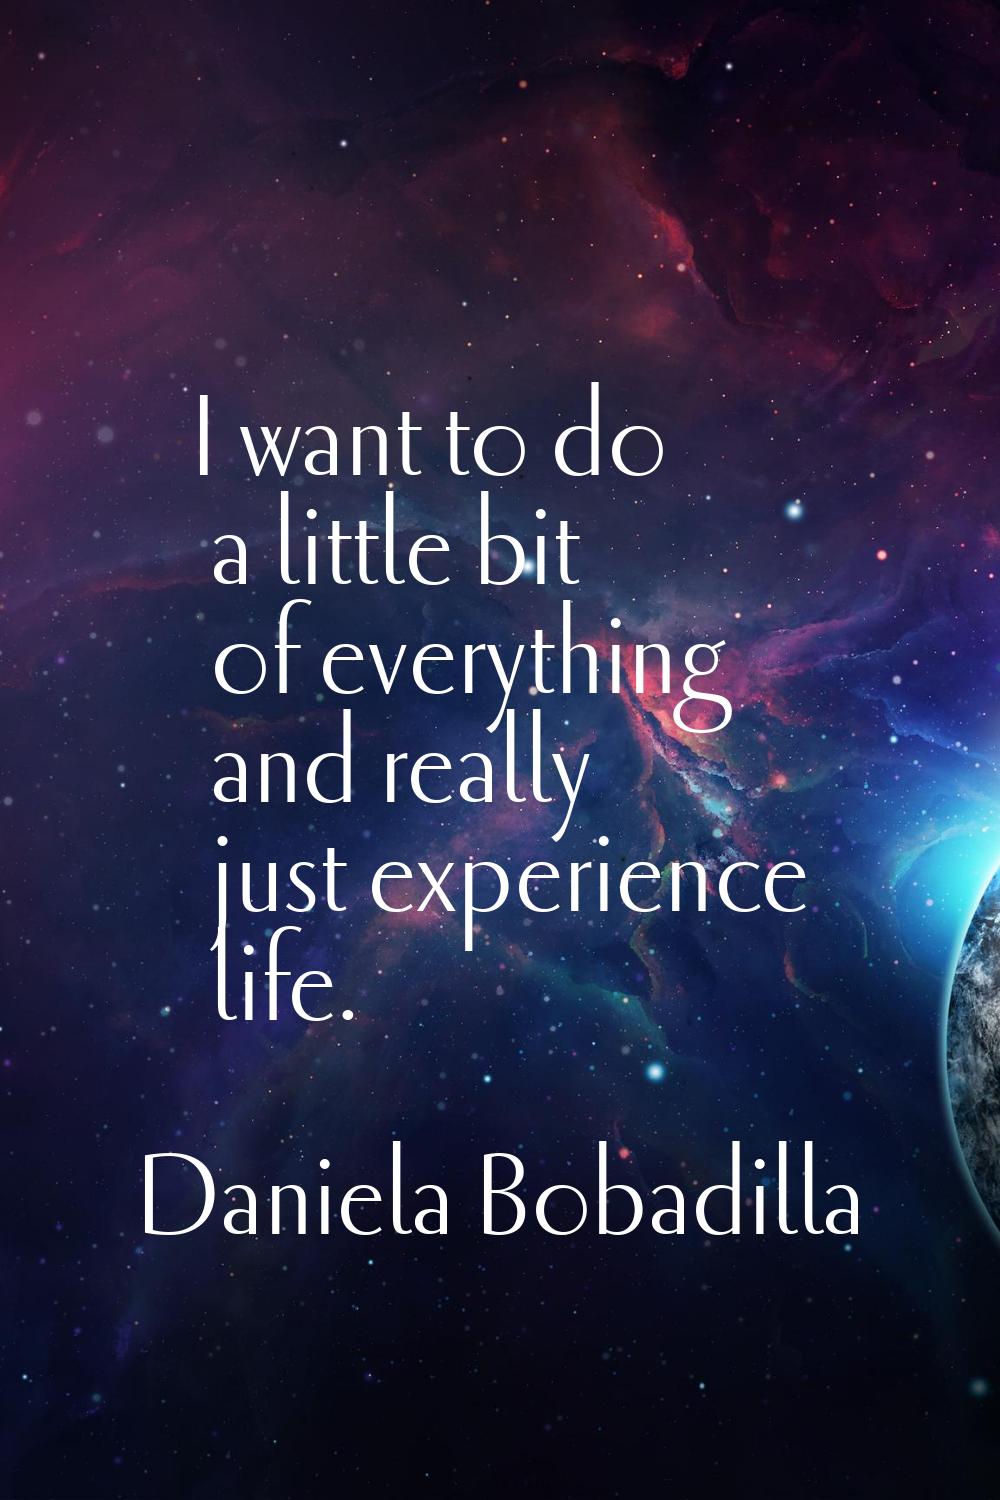 I want to do a little bit of everything and really just experience life.